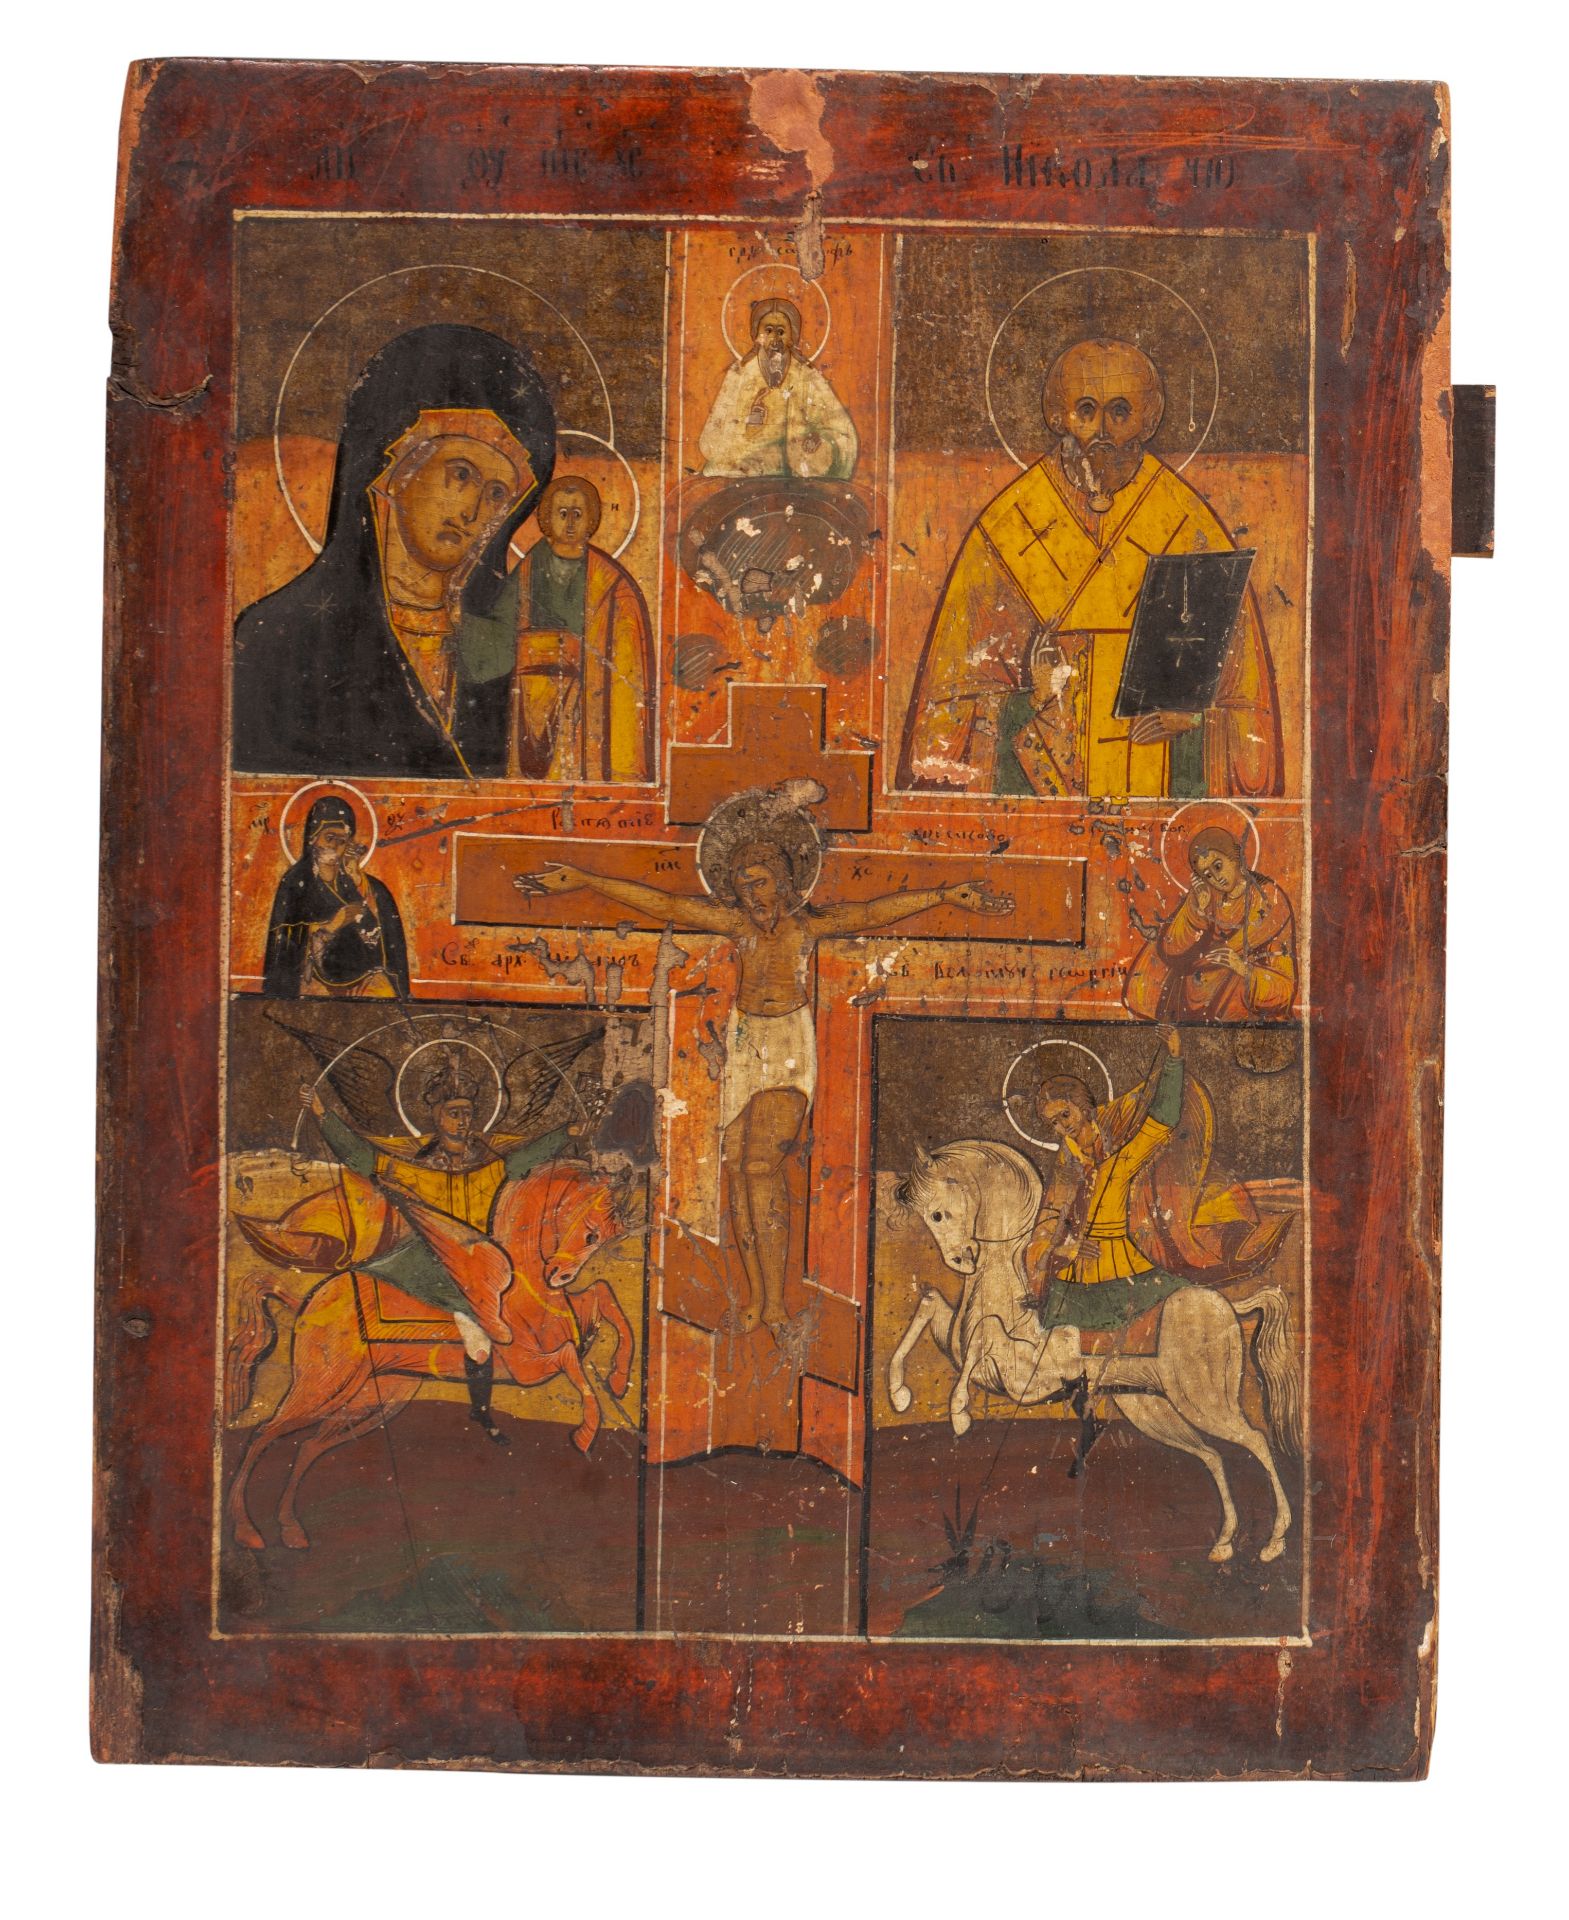 Two 19thC Russian icons, 30 x 35 - 30,5 x 38,7 cm - Image 3 of 4